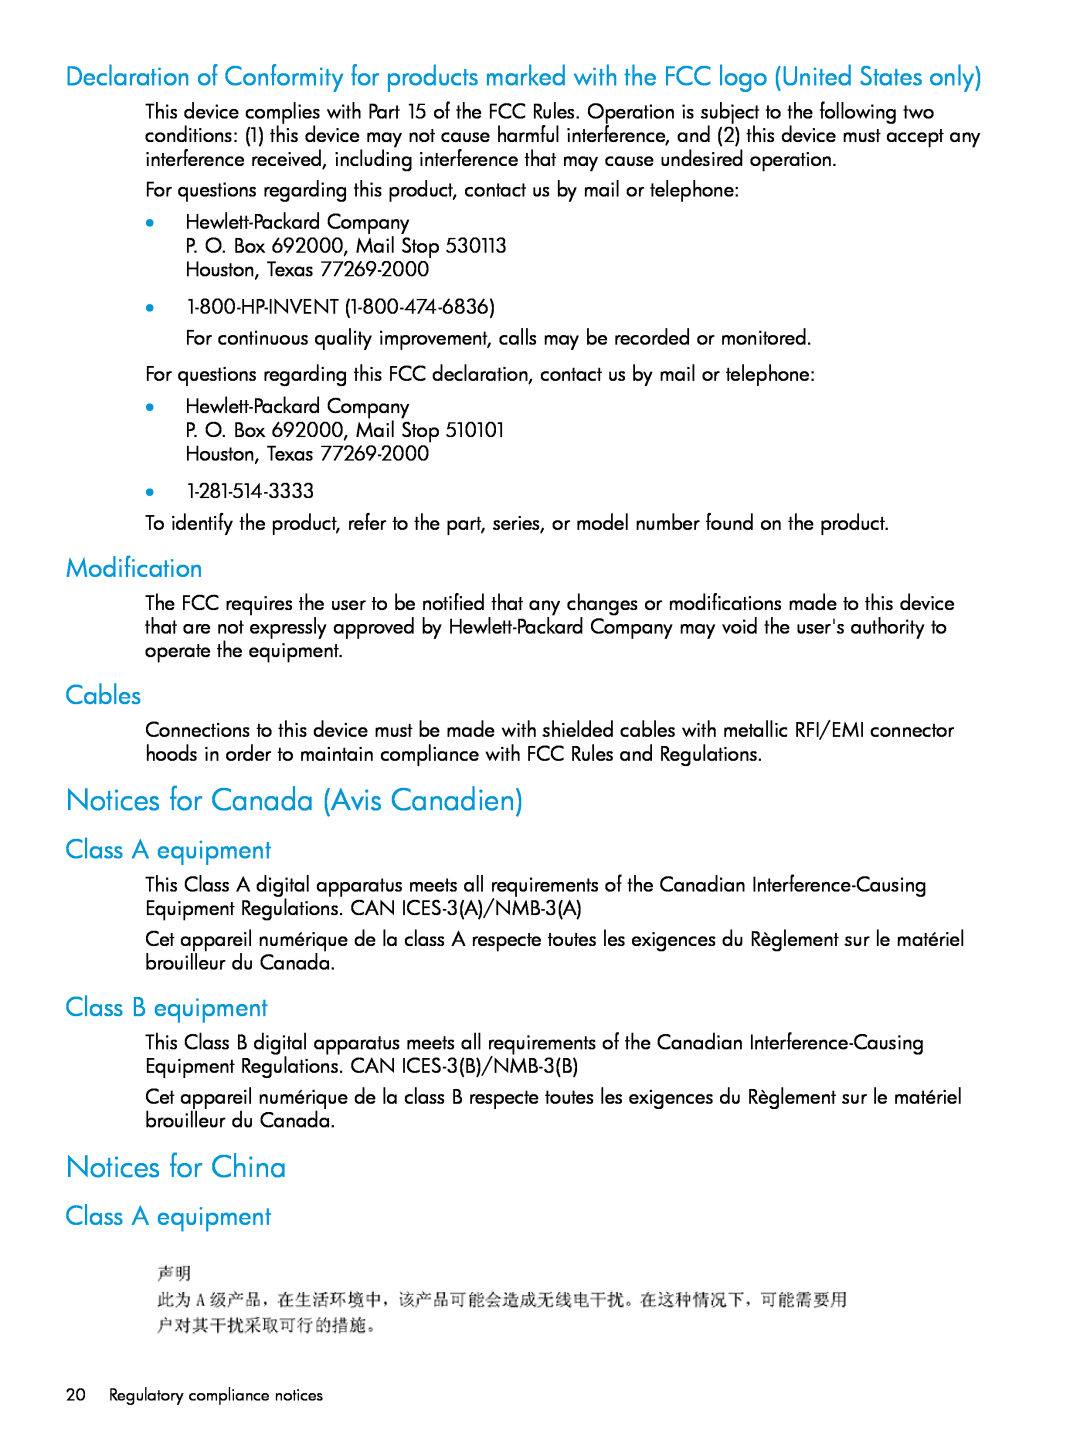 HP Networking Safety and Compliance manual Notices for Canada Avis Canadien, Notices for China, Modification, Cables 